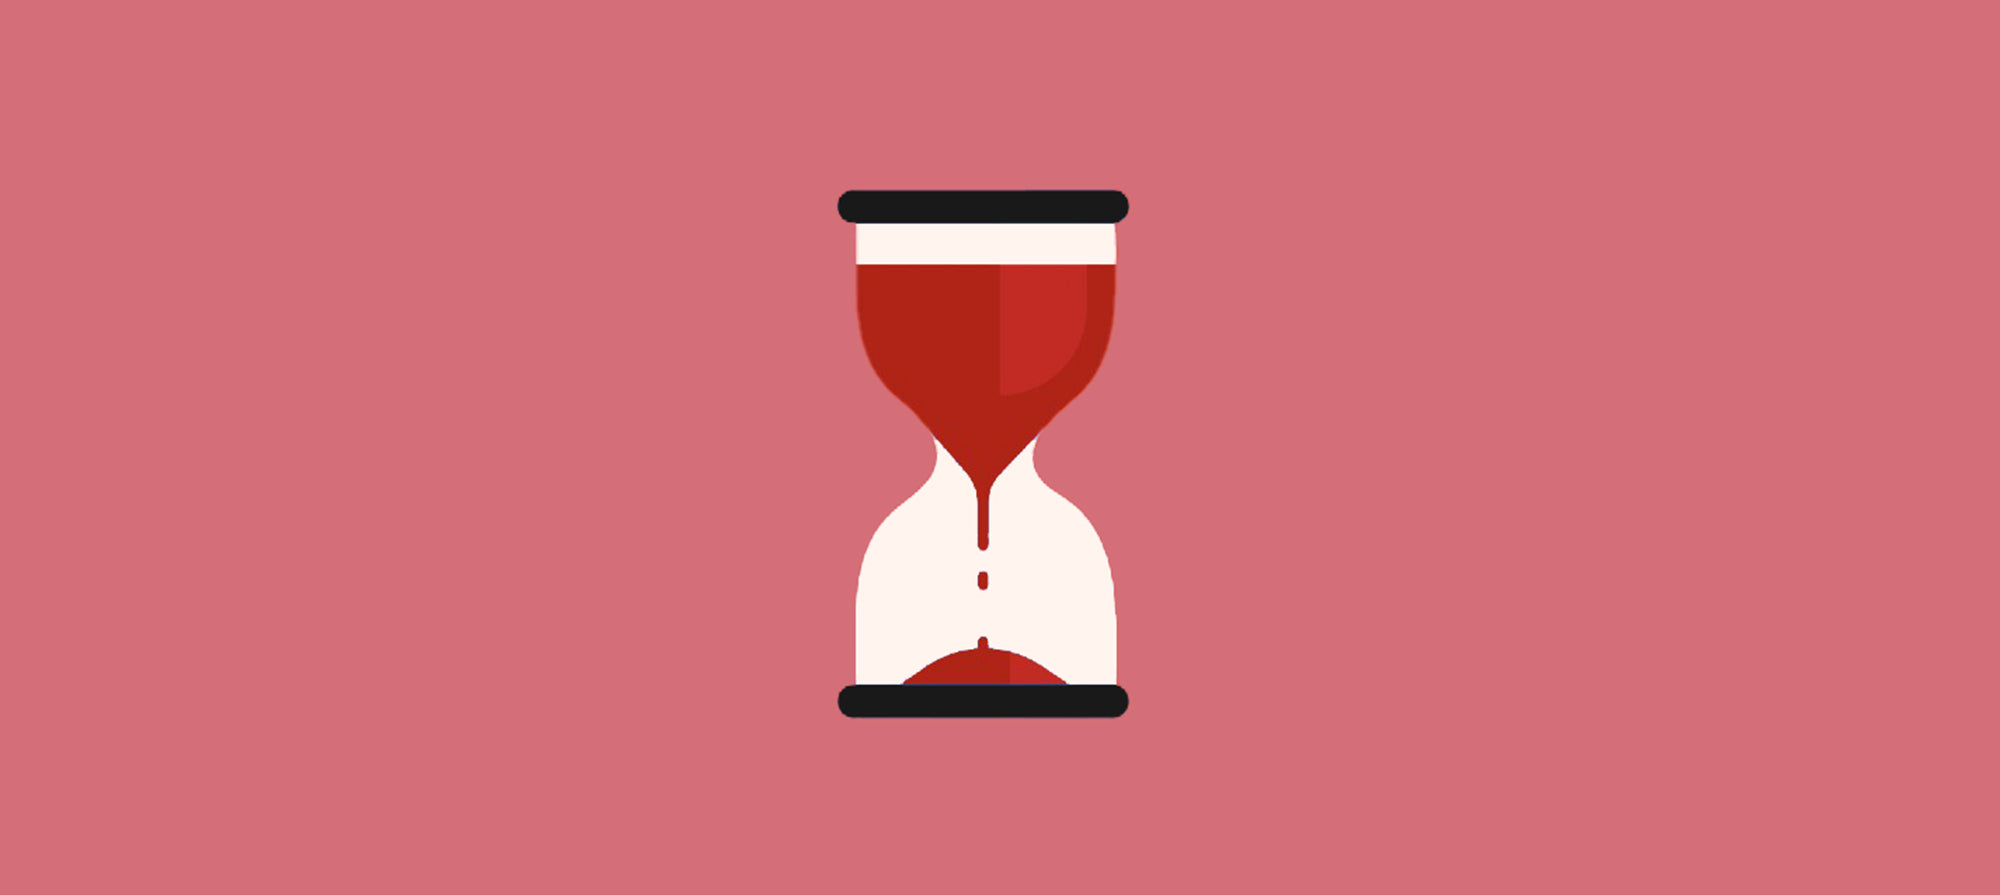 Ruby Cup Explains: How To Make Your Period End Faster